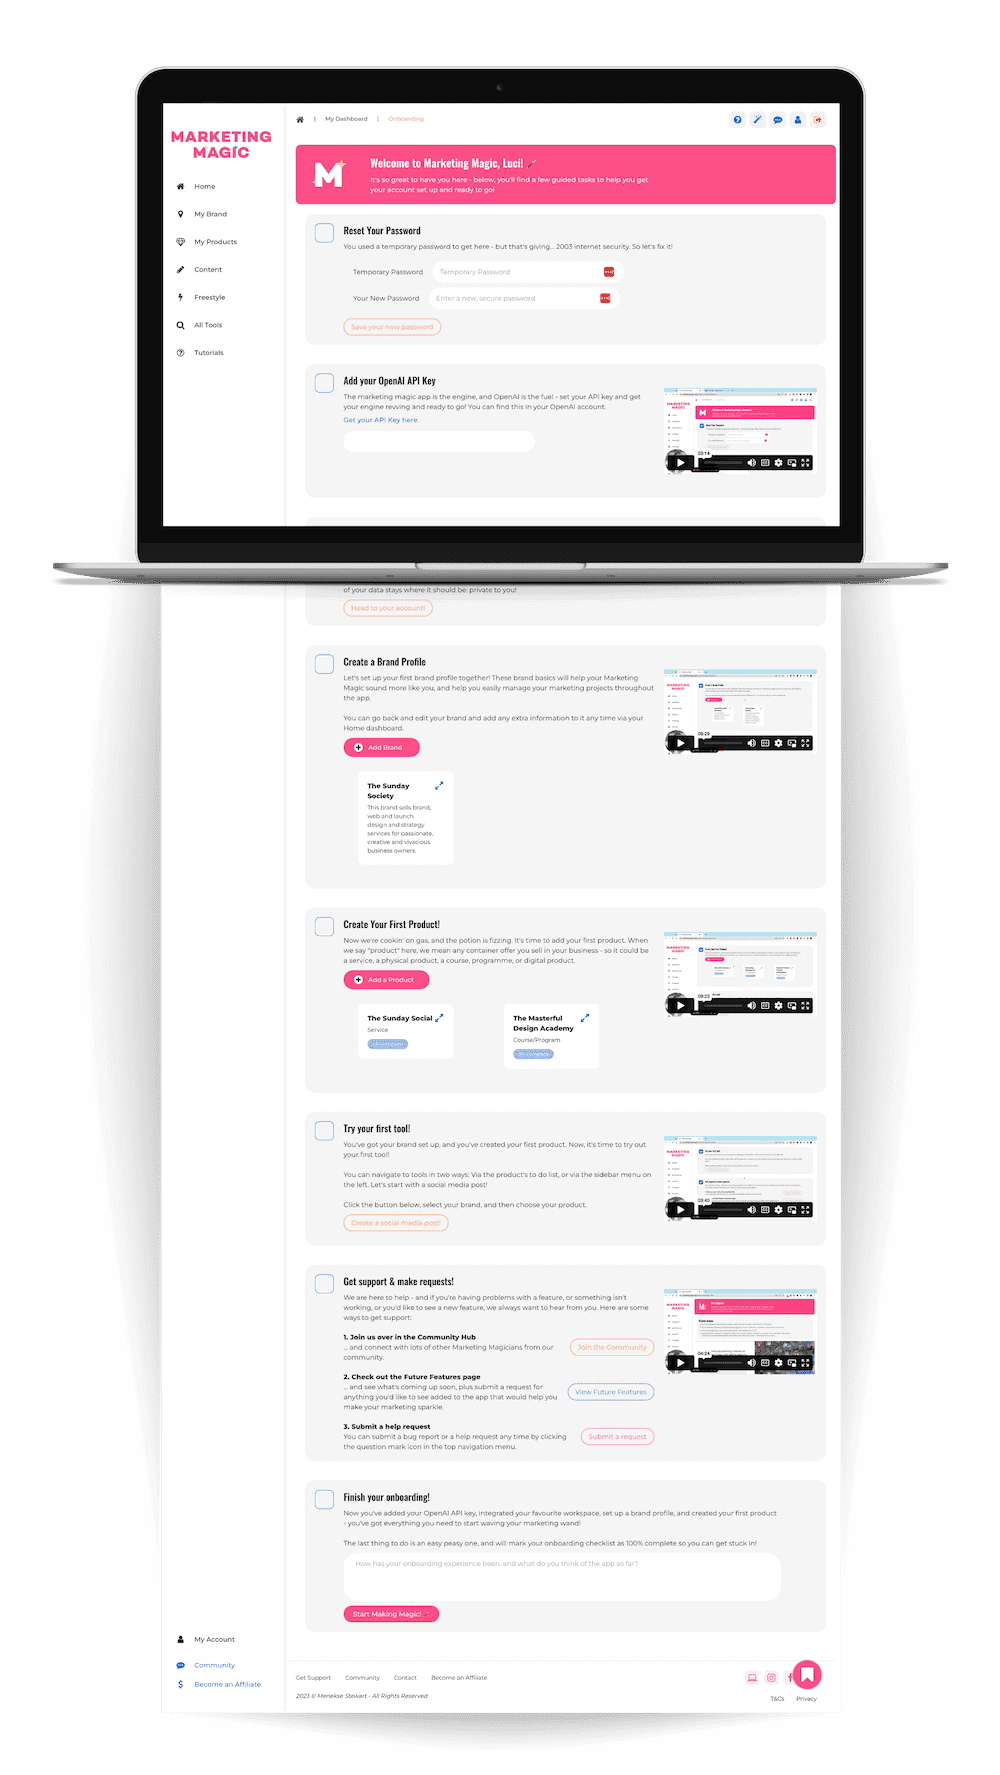 A mockup of the Marketing Magic ai marketing tool on laptop demonstrating the easy onboarding dashboard.